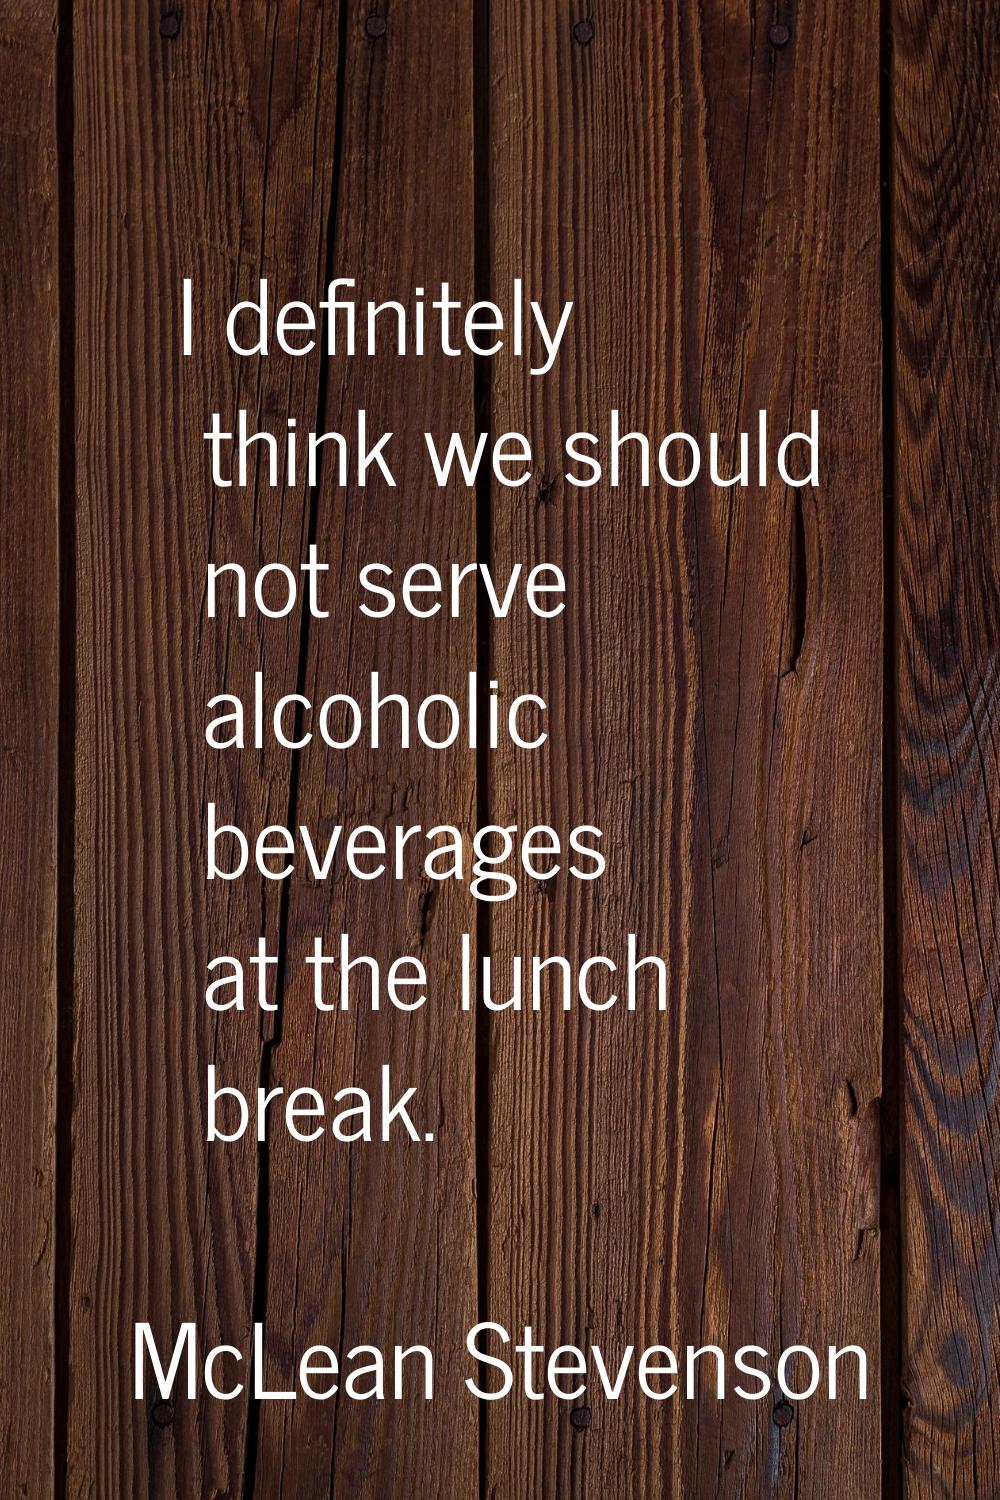 I definitely think we should not serve alcoholic beverages at the lunch break.